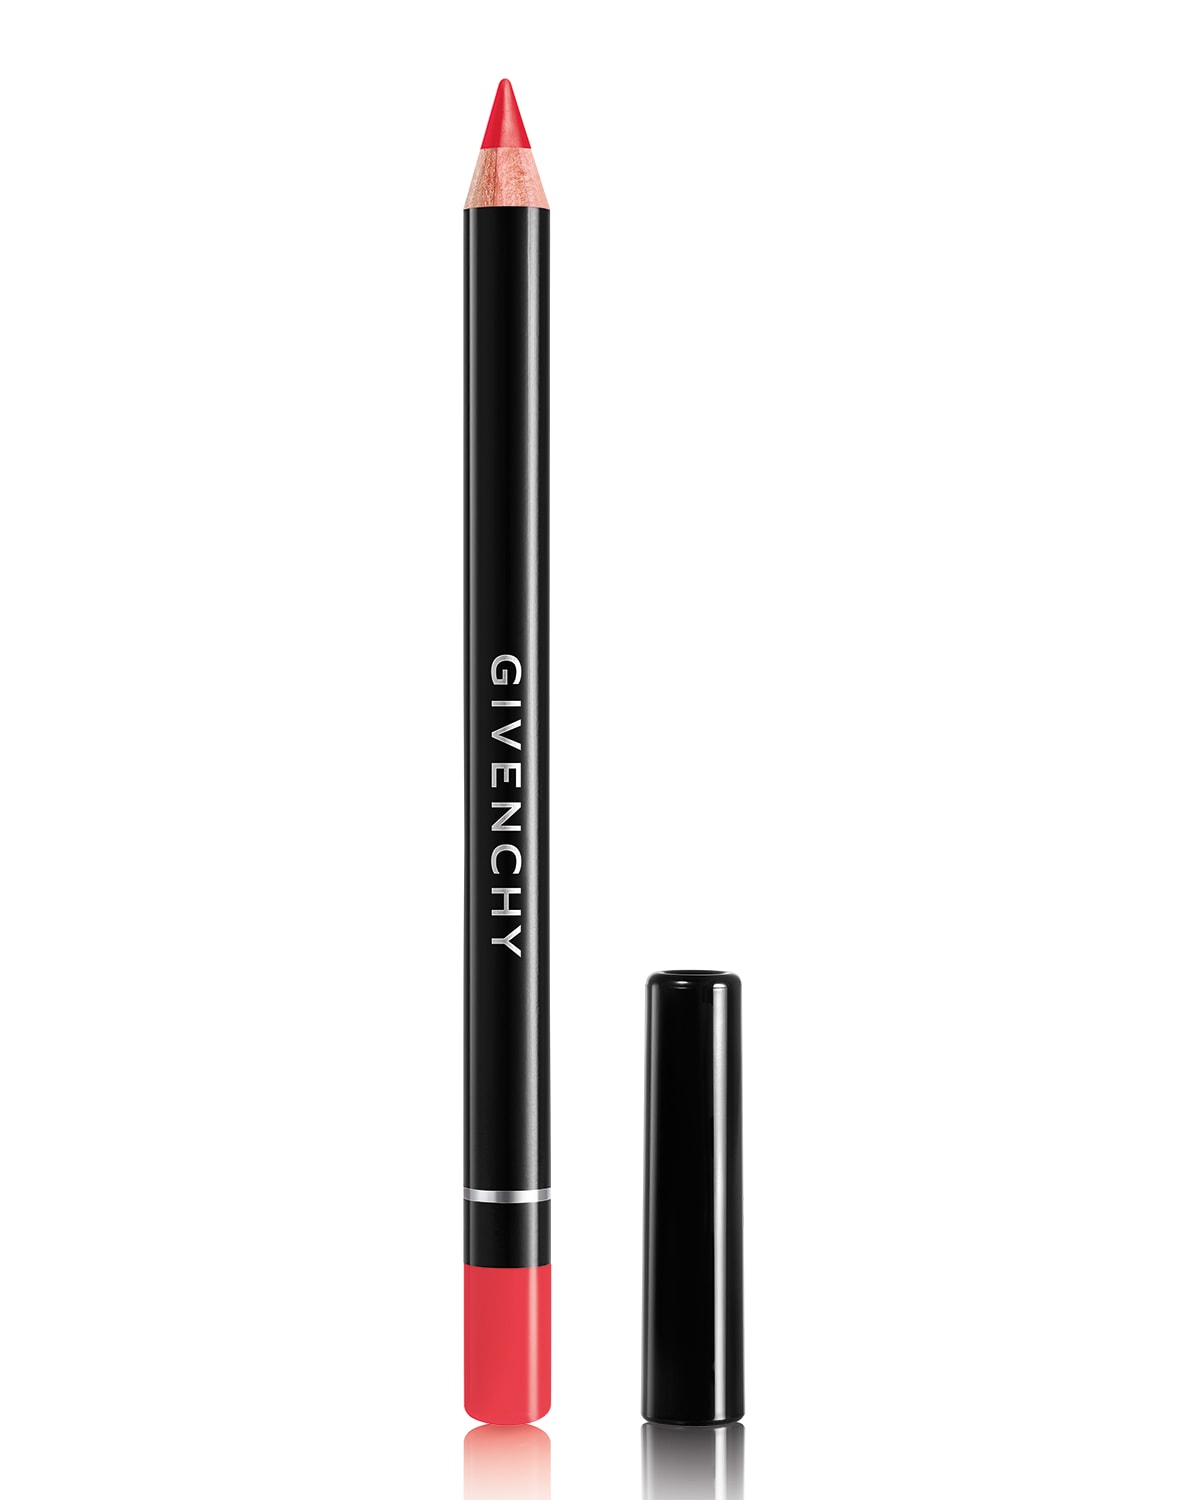 Givenchy Waterproof Lip Liner In White